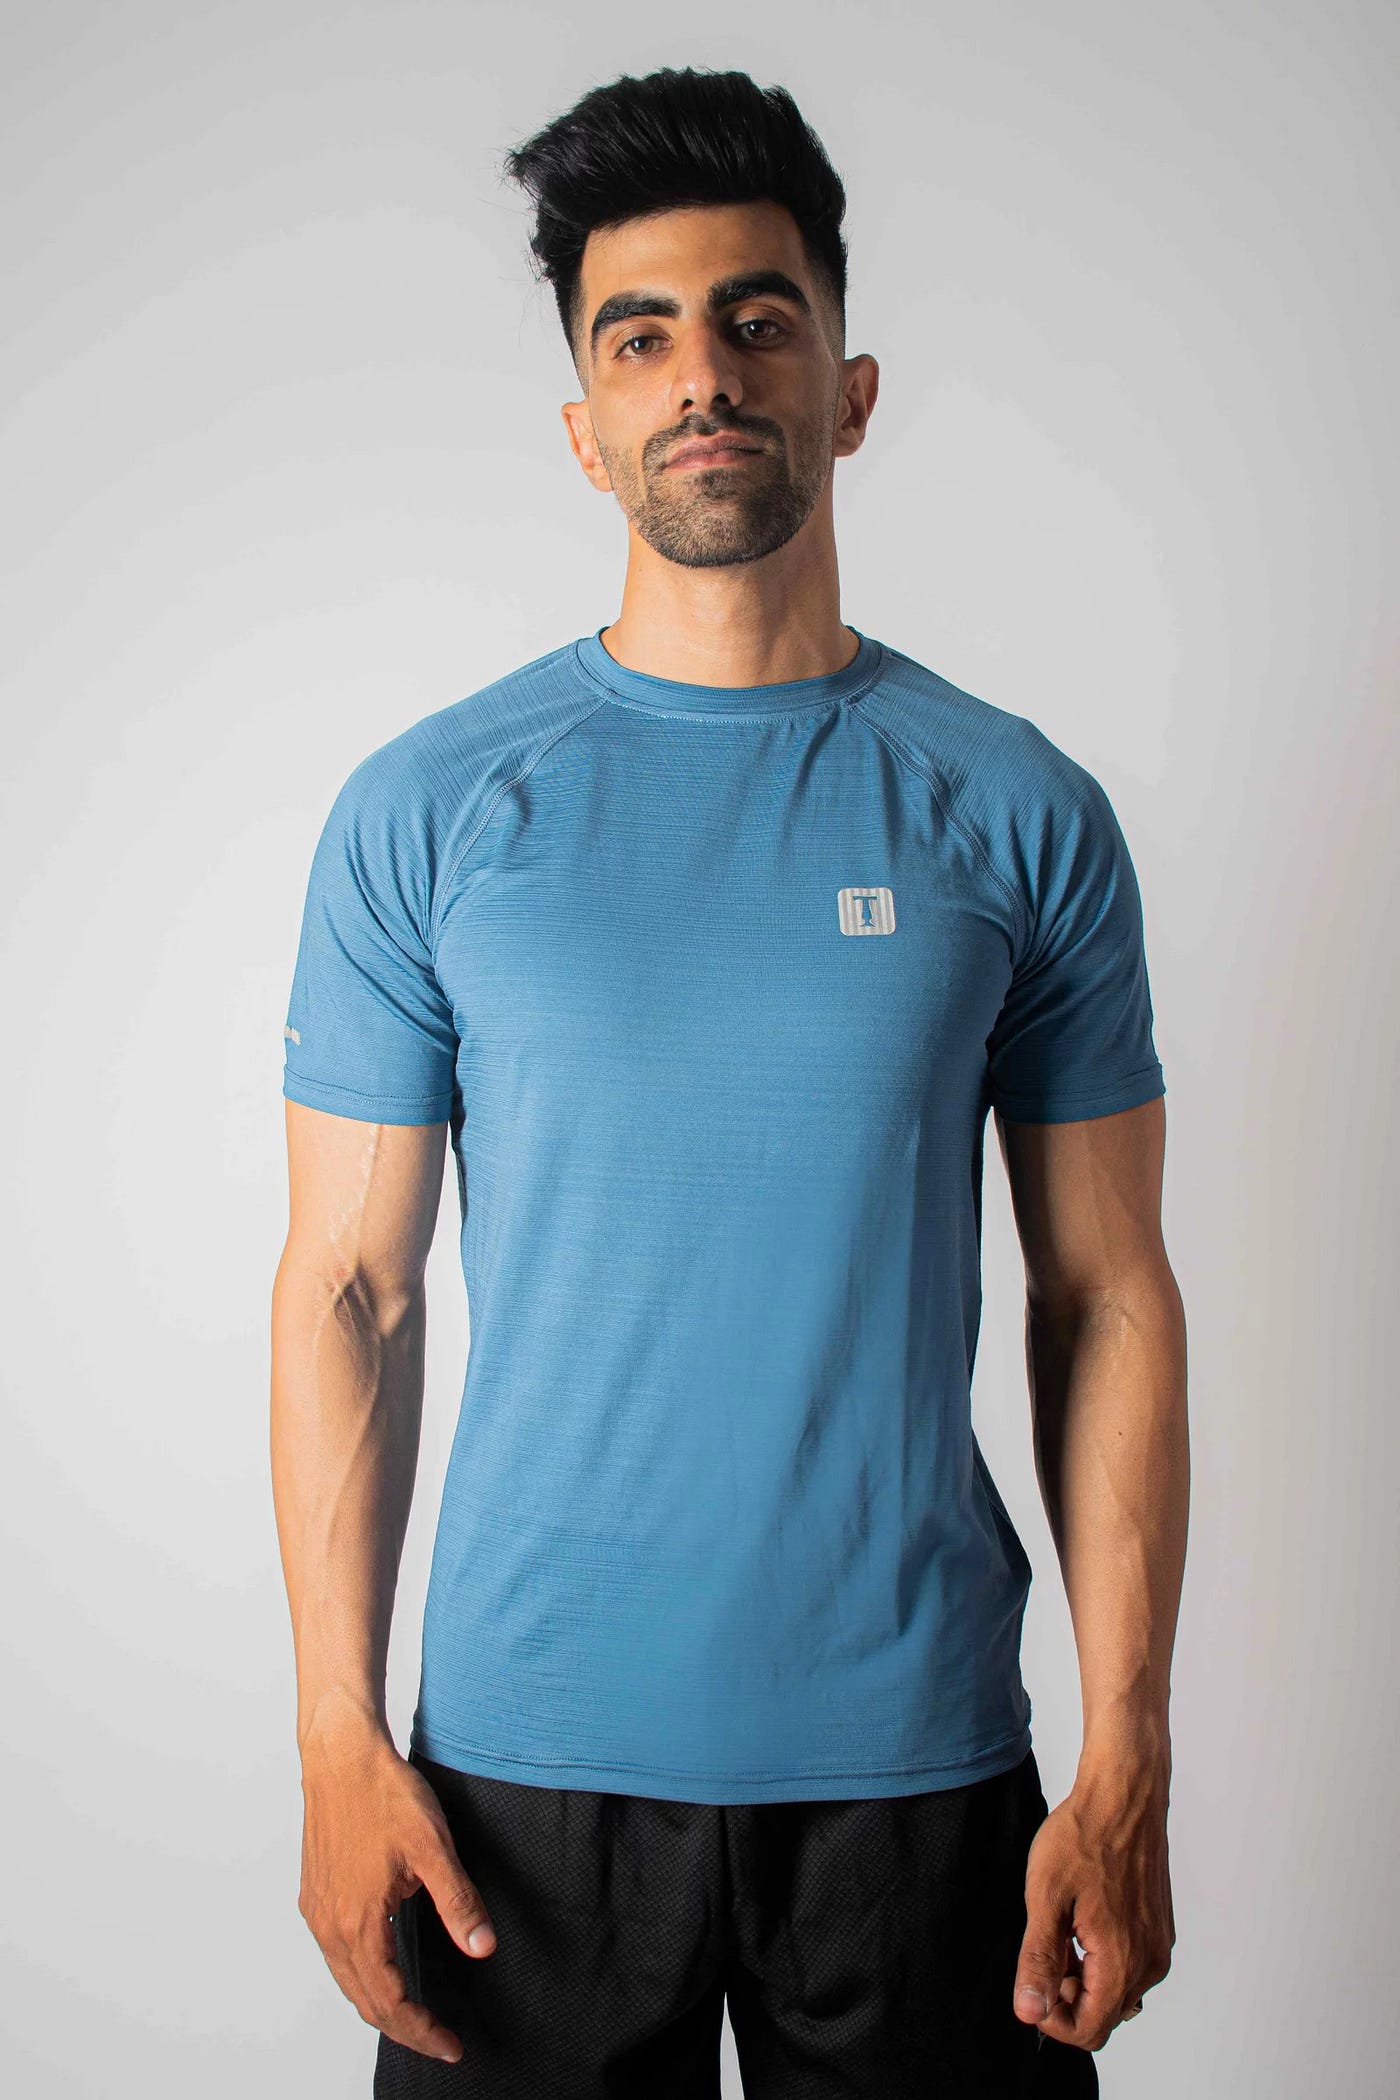 Gym Clothes for Men: How to Stay Comfortable and Confident During